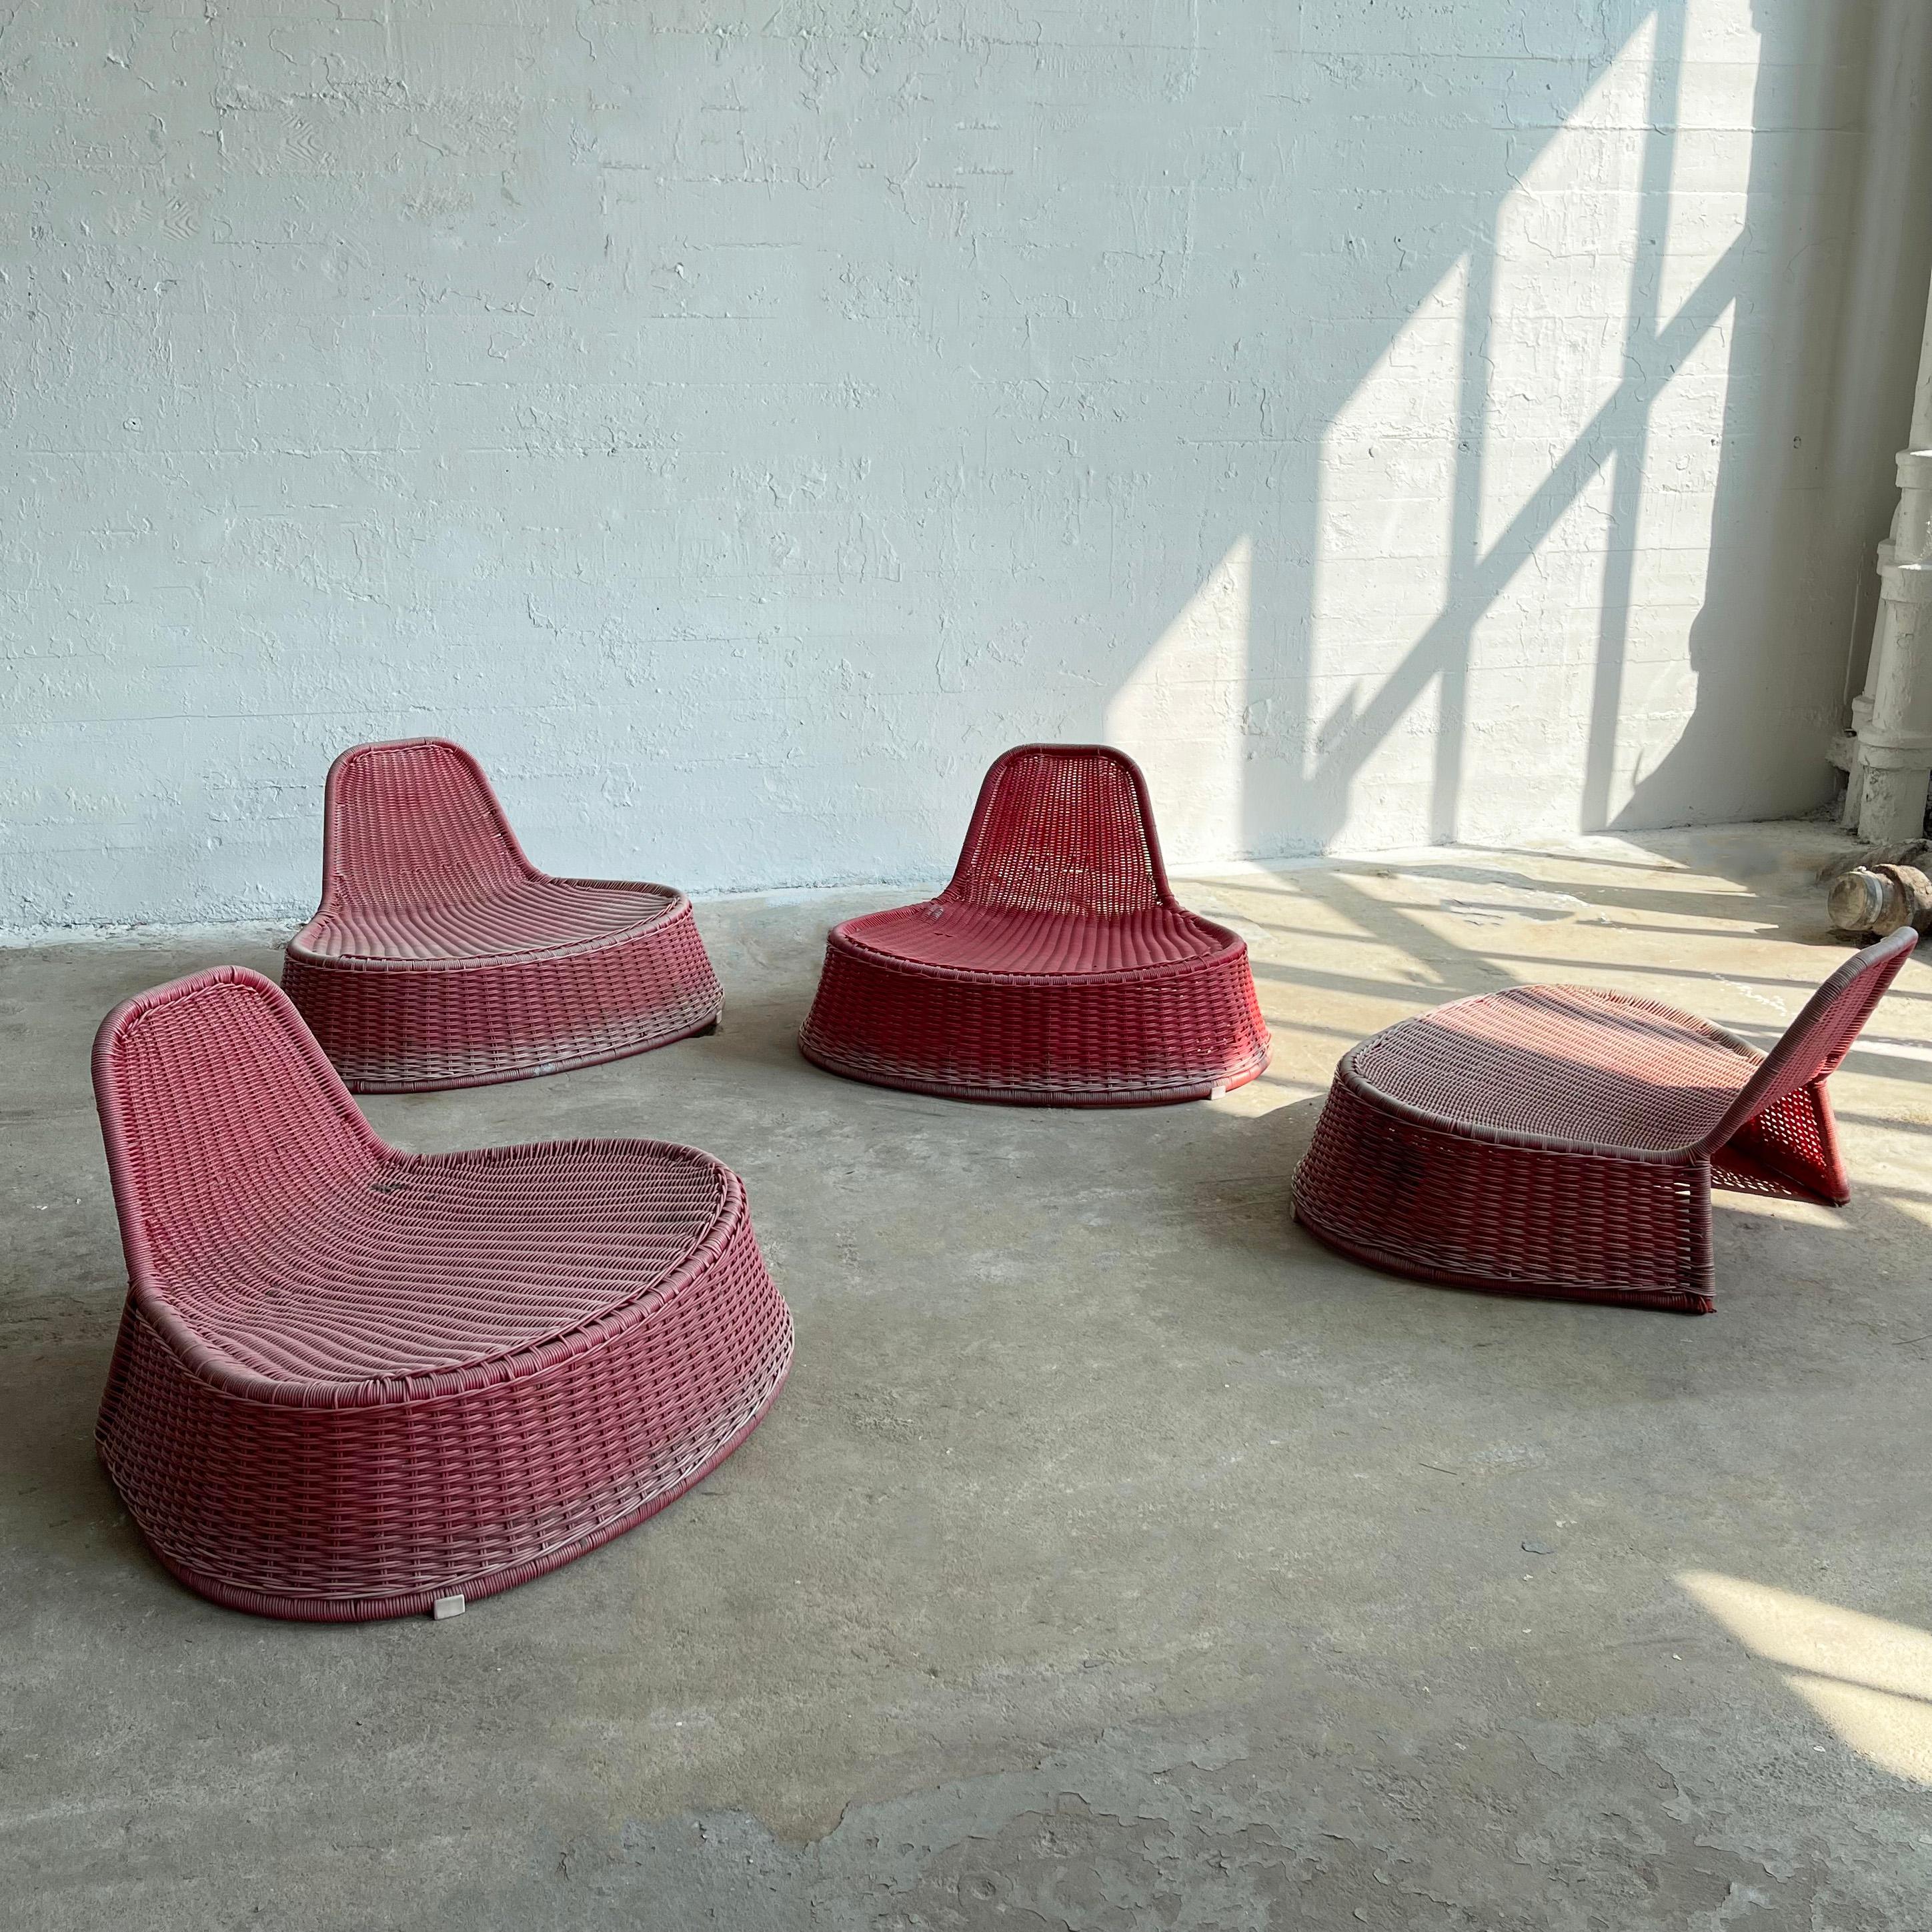 20th Century Pink Woven Outdoor Lounge Chairs By Monika Mulder For Ikea For Sale